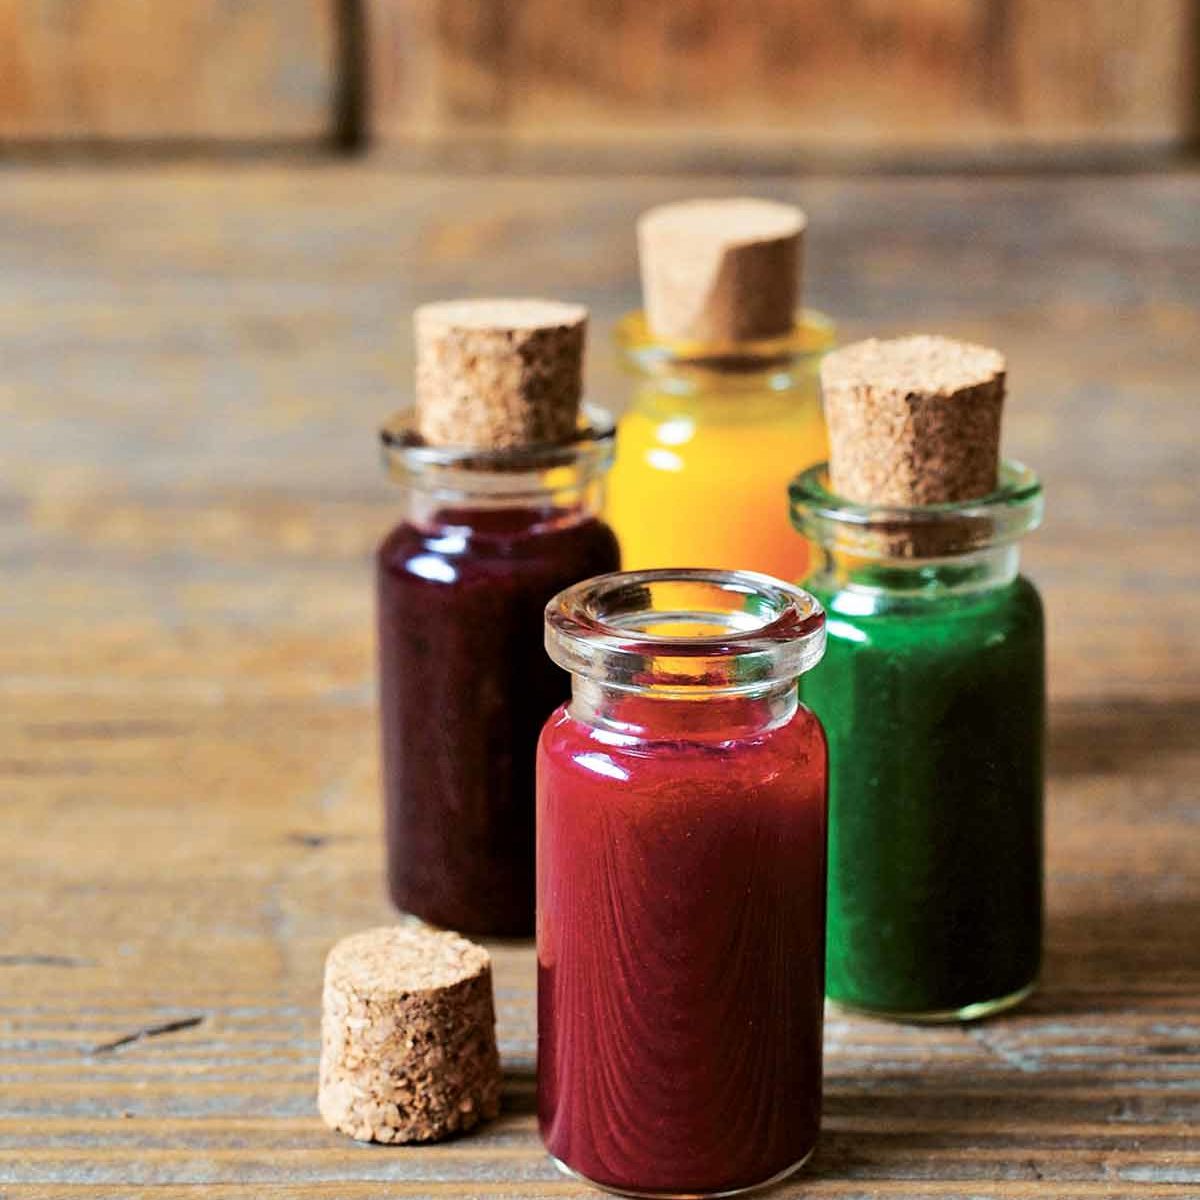 How To Make Natural Food Coloring | Leite's Culinaria